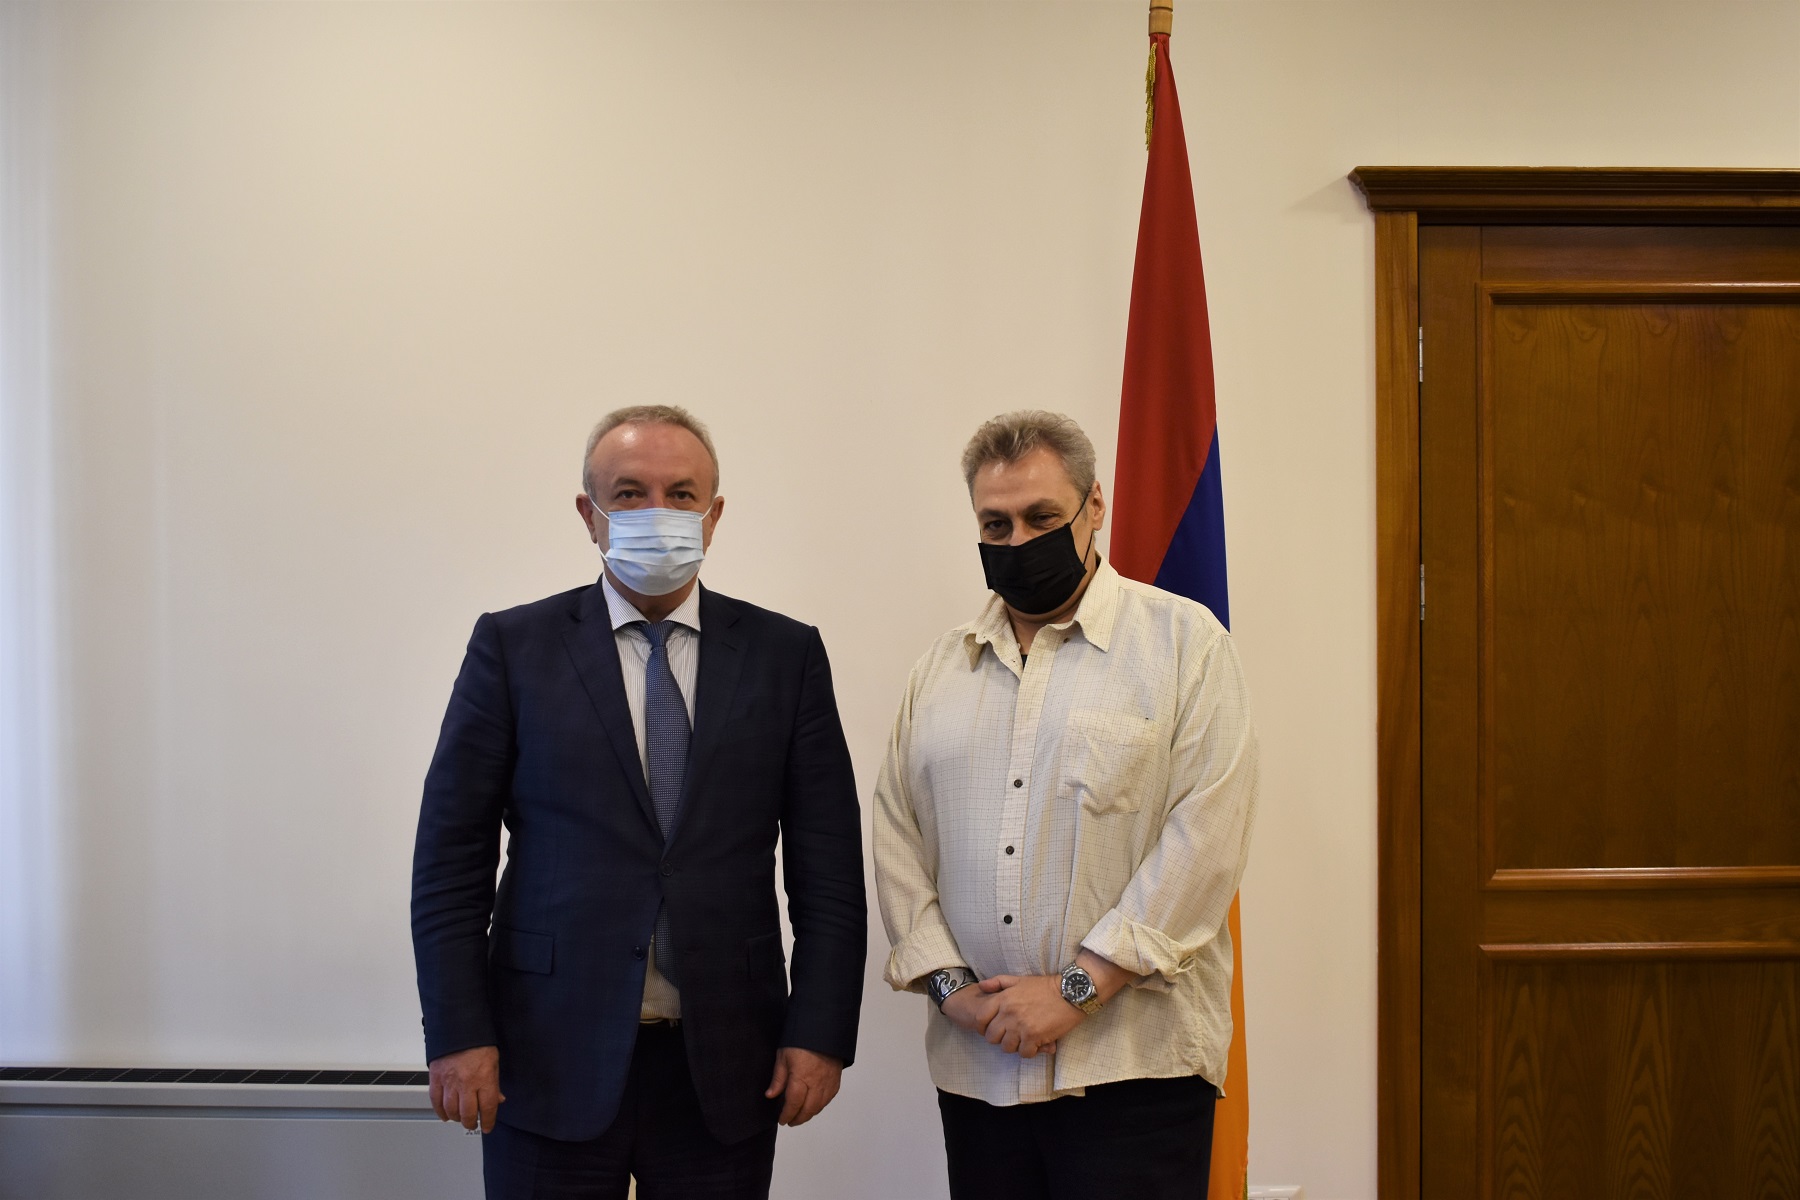 Vahram Dumanyan: The participation of internationally recognized artists in the cultural policy of Armenia is one of the priorities of the ministry